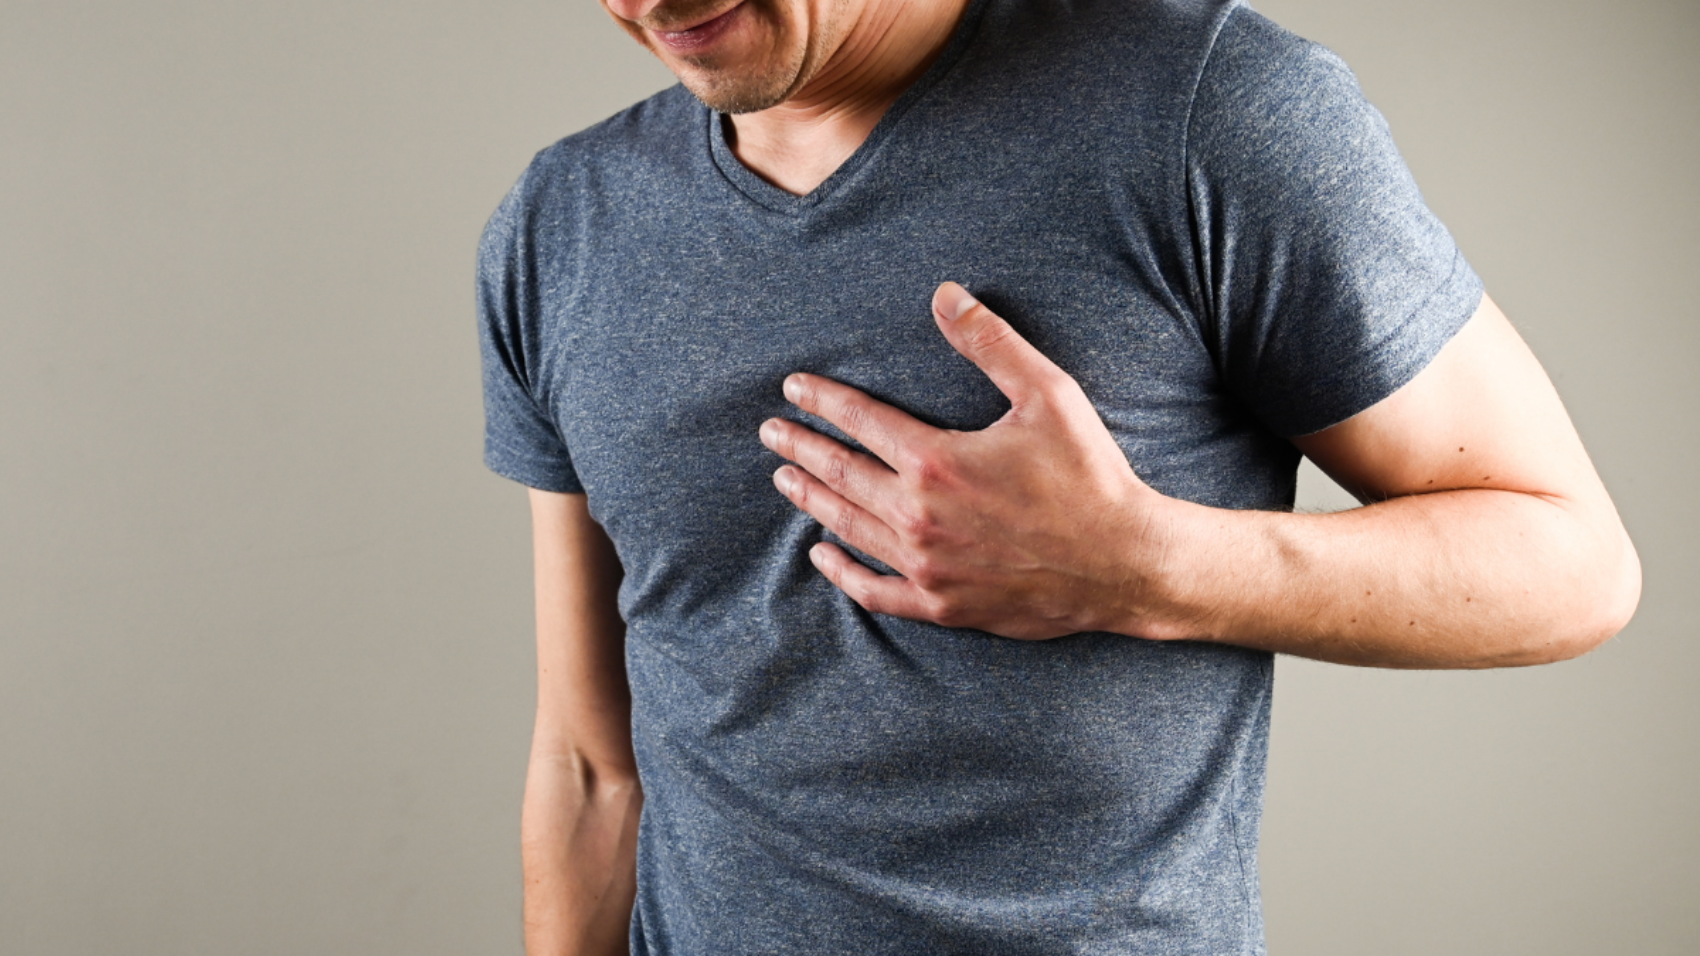 Signs of a Heart Attack in Men - Image